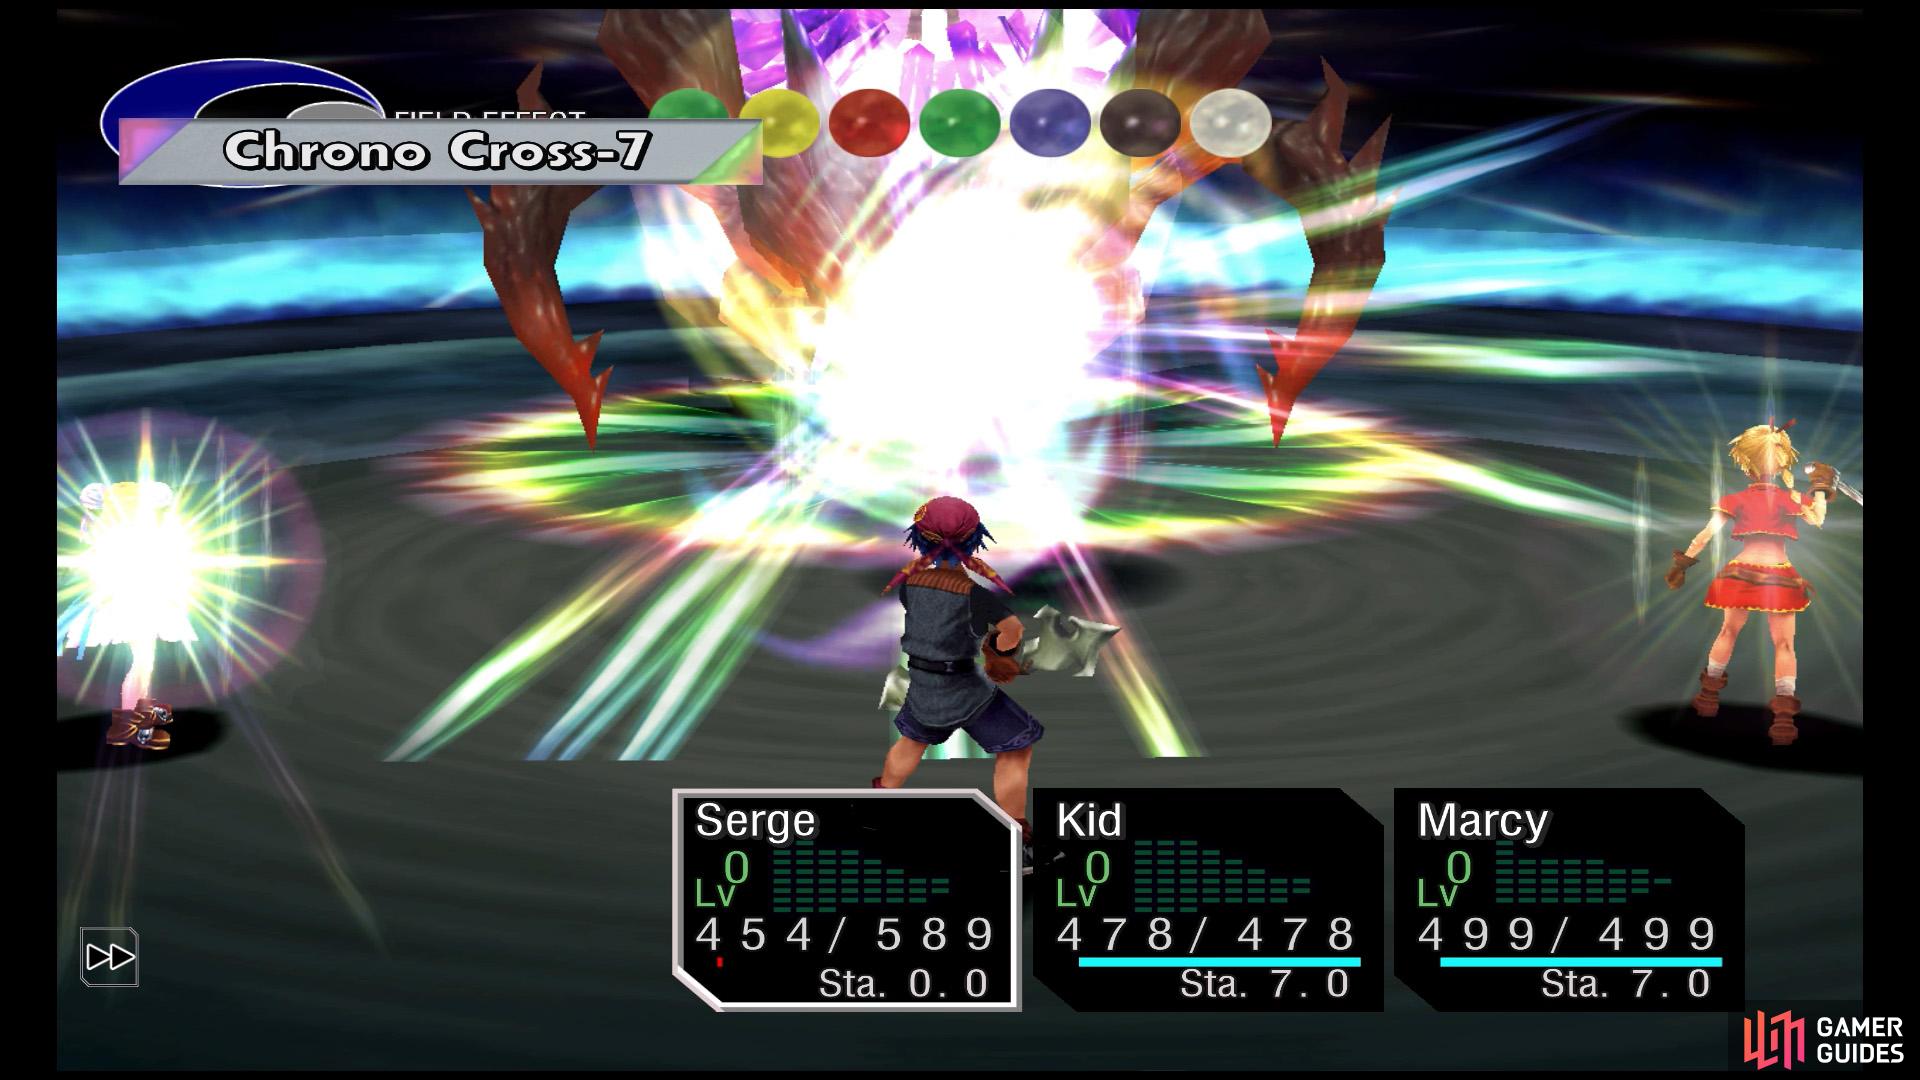 After performing the correct sequence of colors, unleash the Chrono Cross!